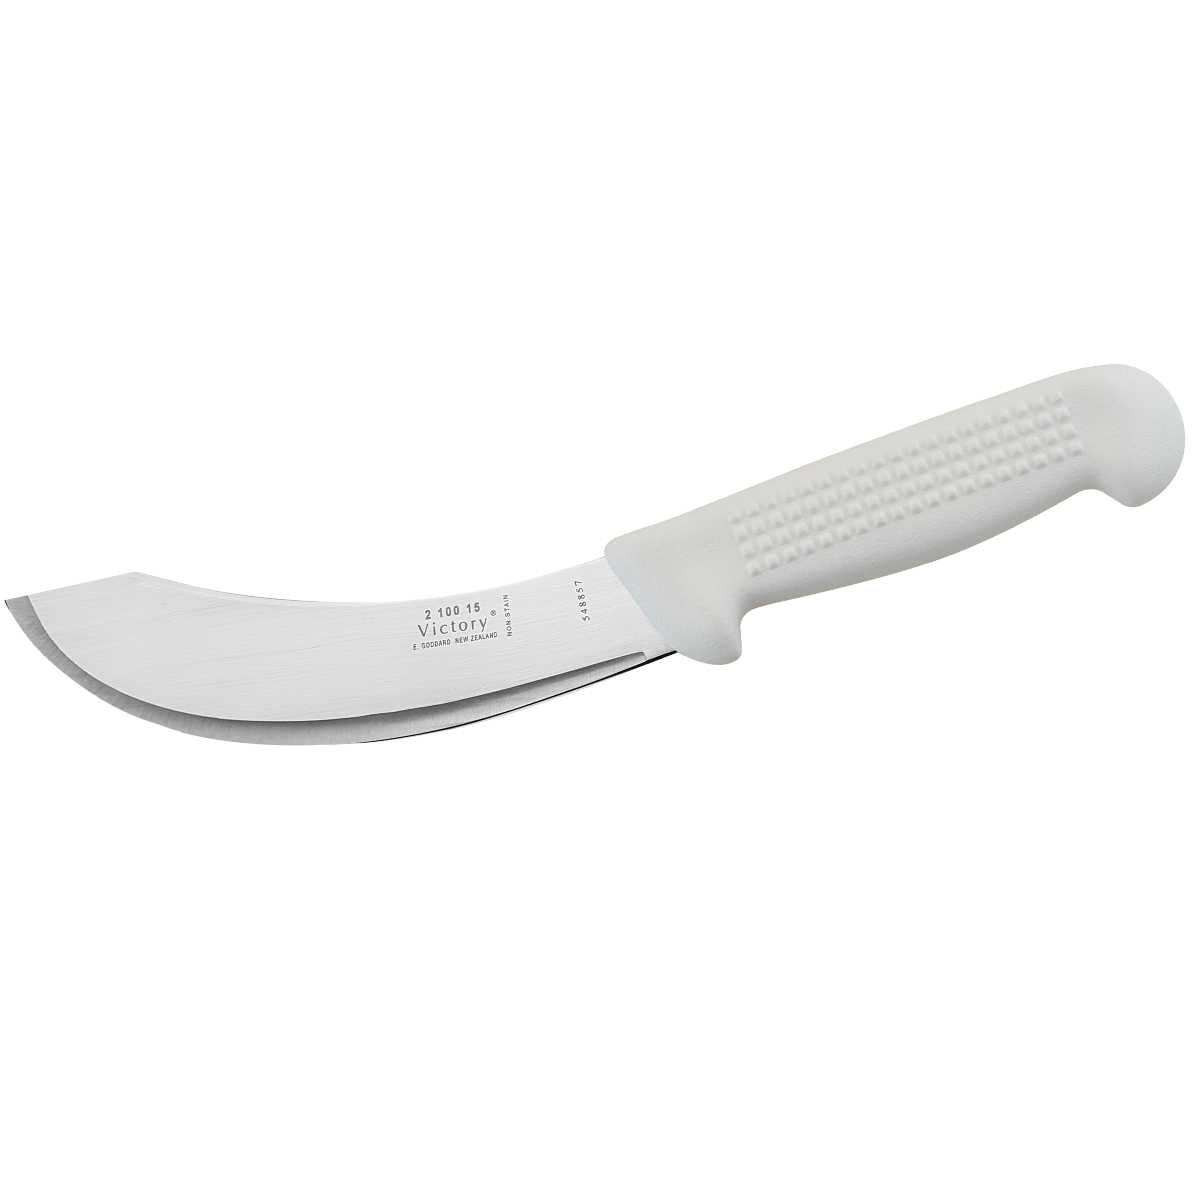 Victory Skinning Knife, 15cm (6) - Hollow Ground - White